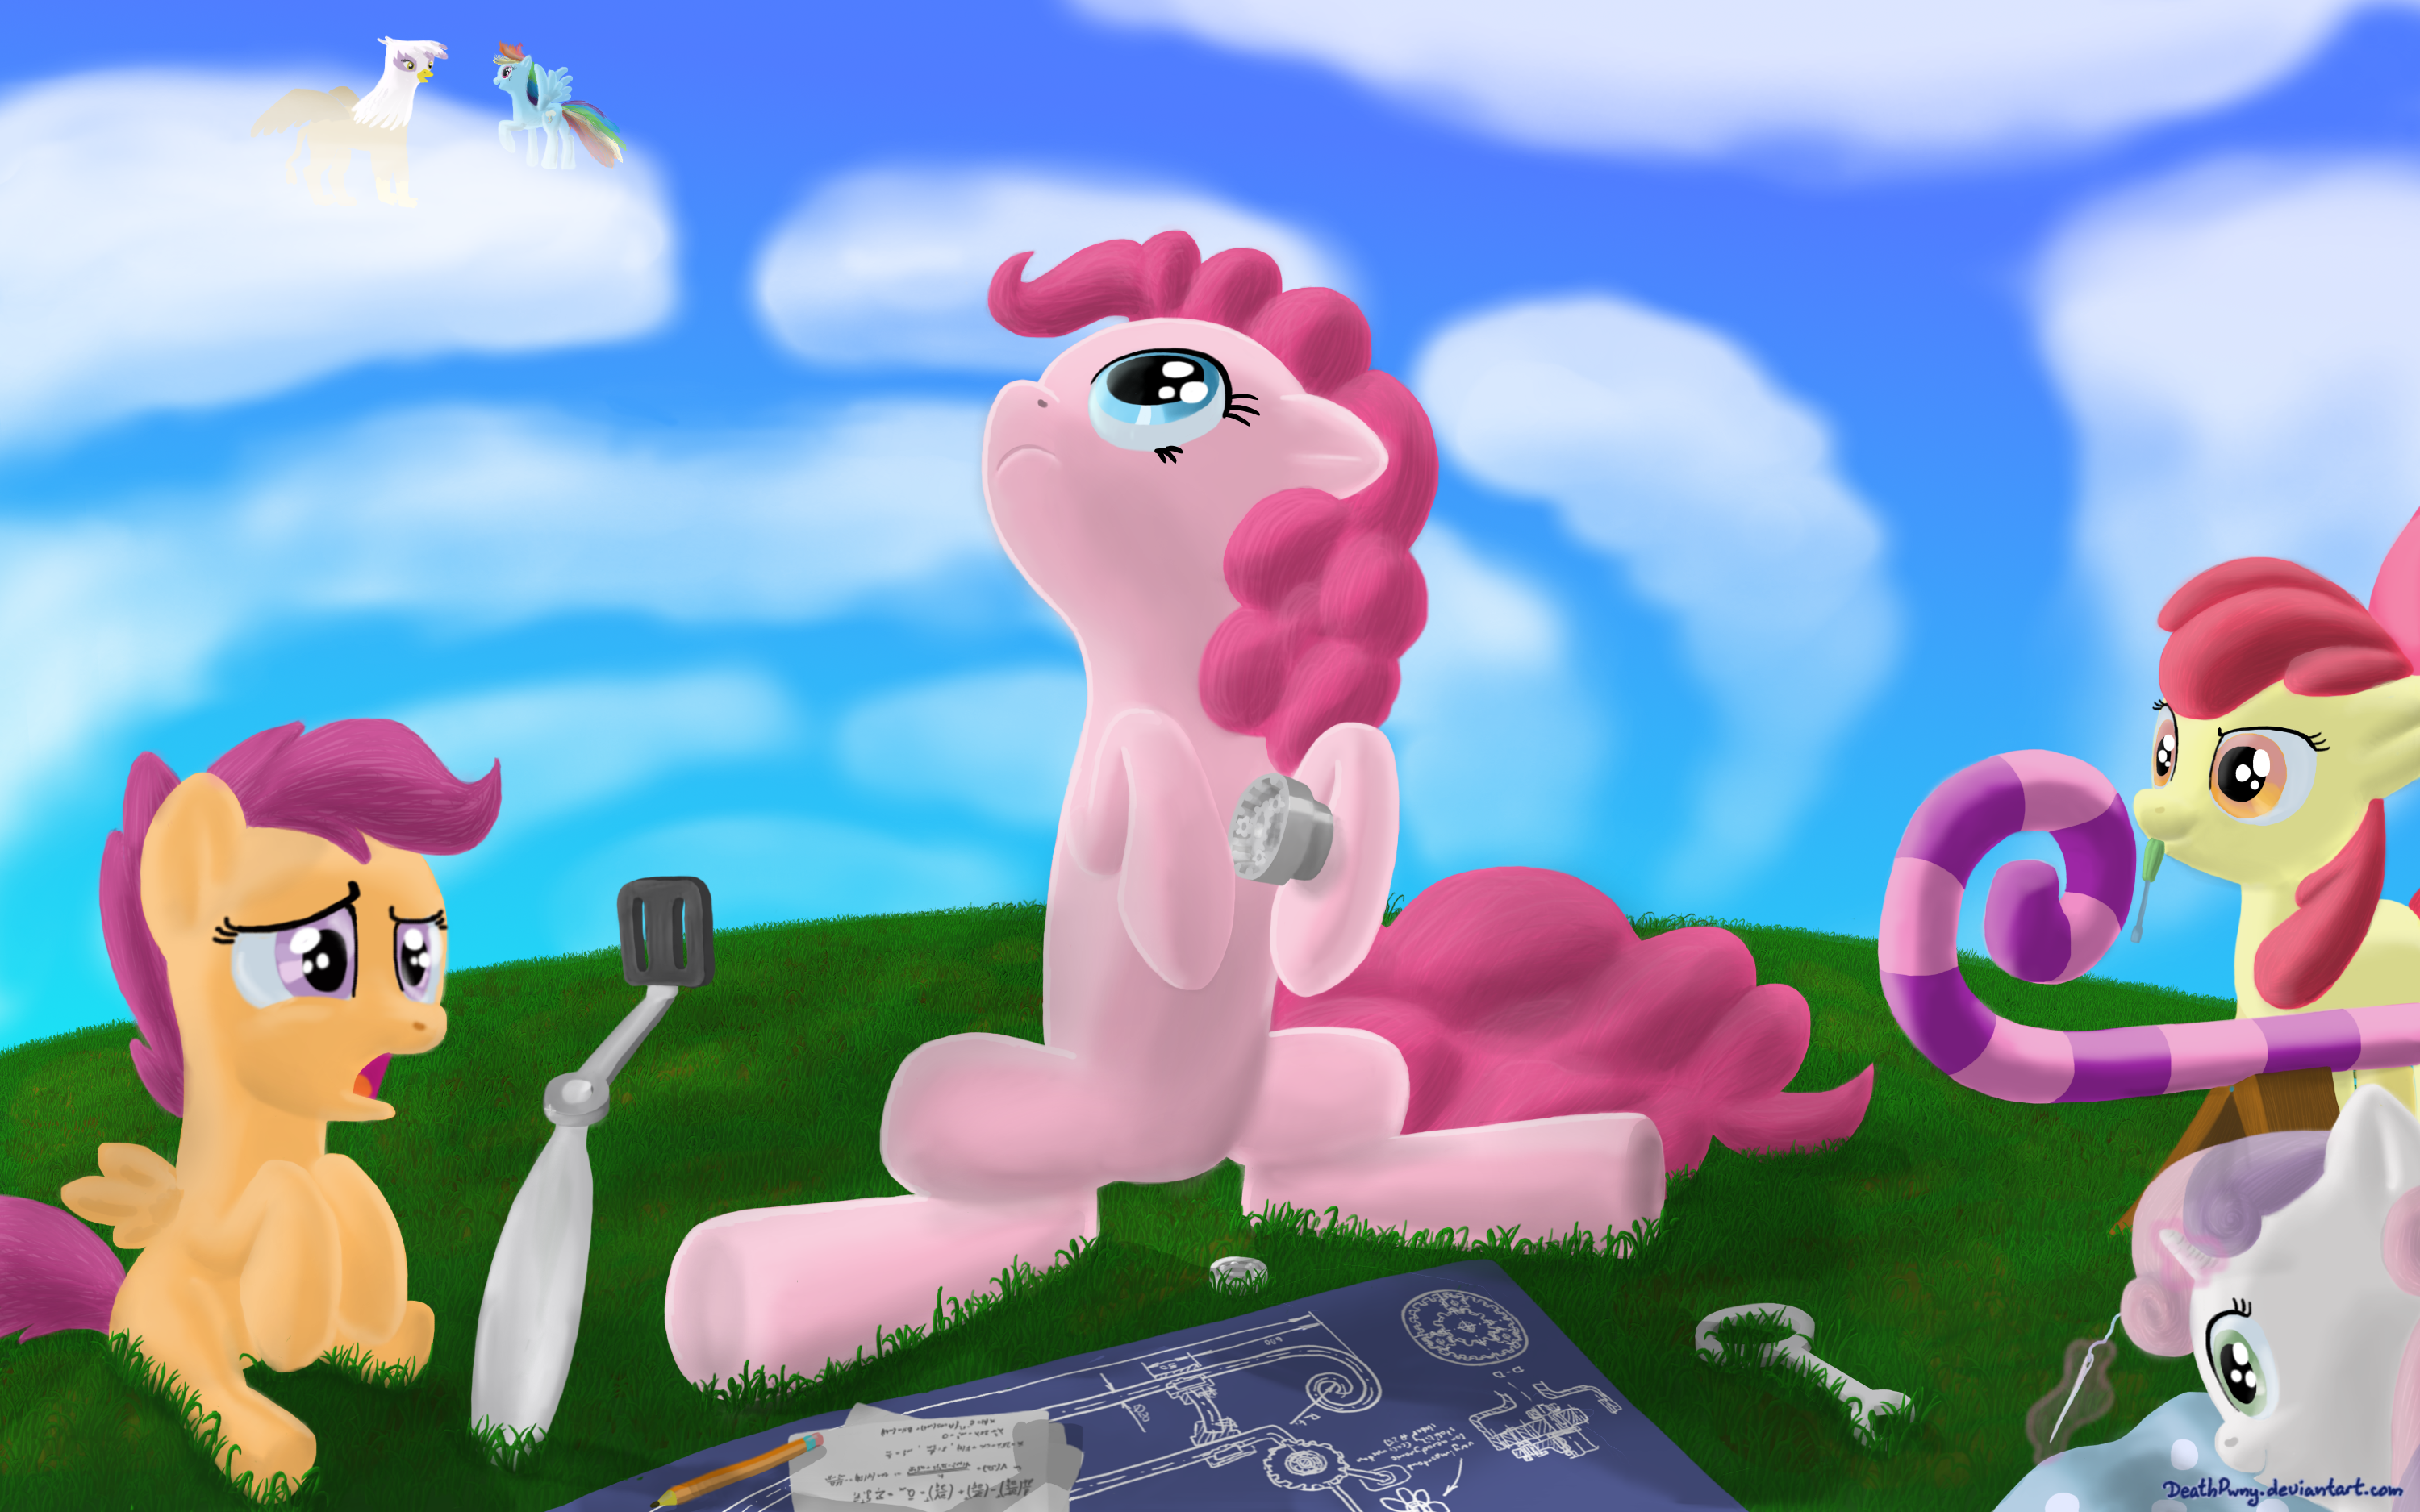 CMC Pinkacopter builders, YAY by DeathPwny